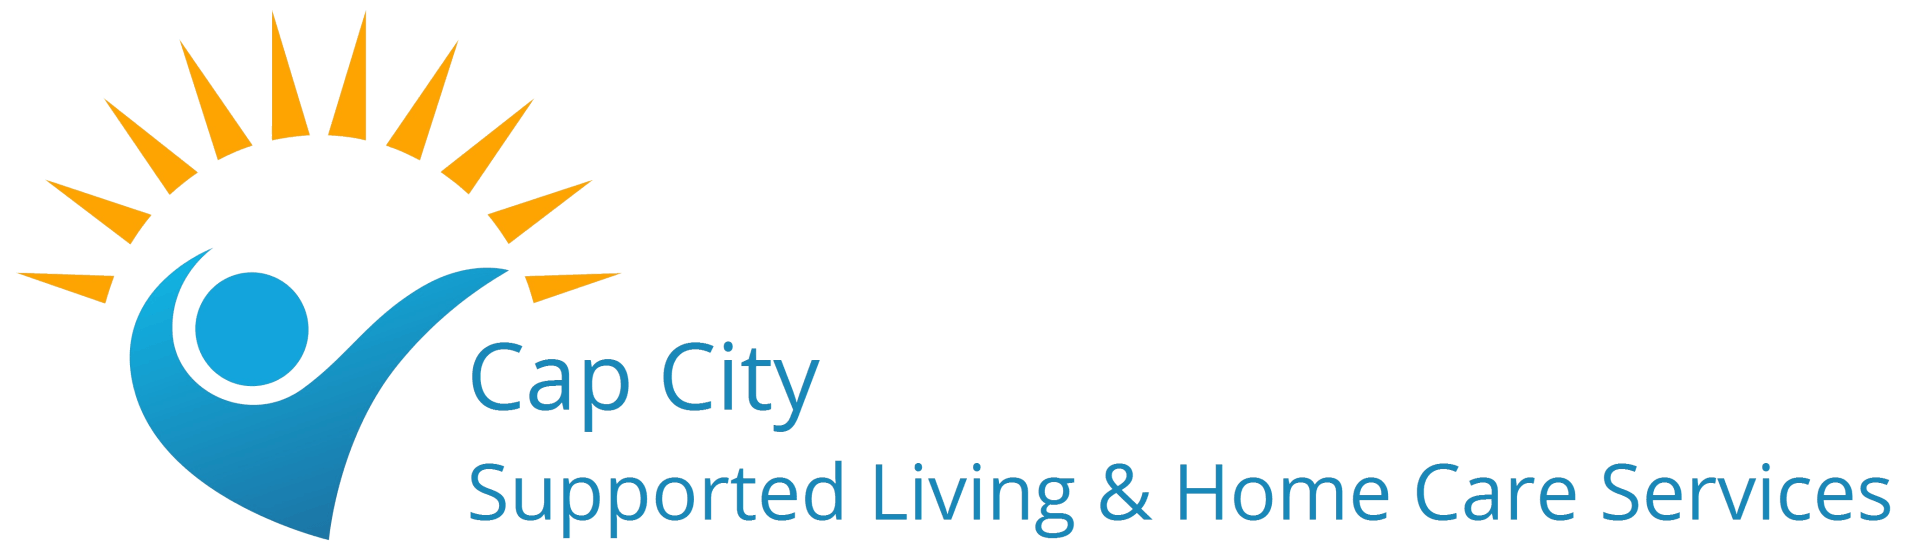 Cap City Supported Living & Home Care Services